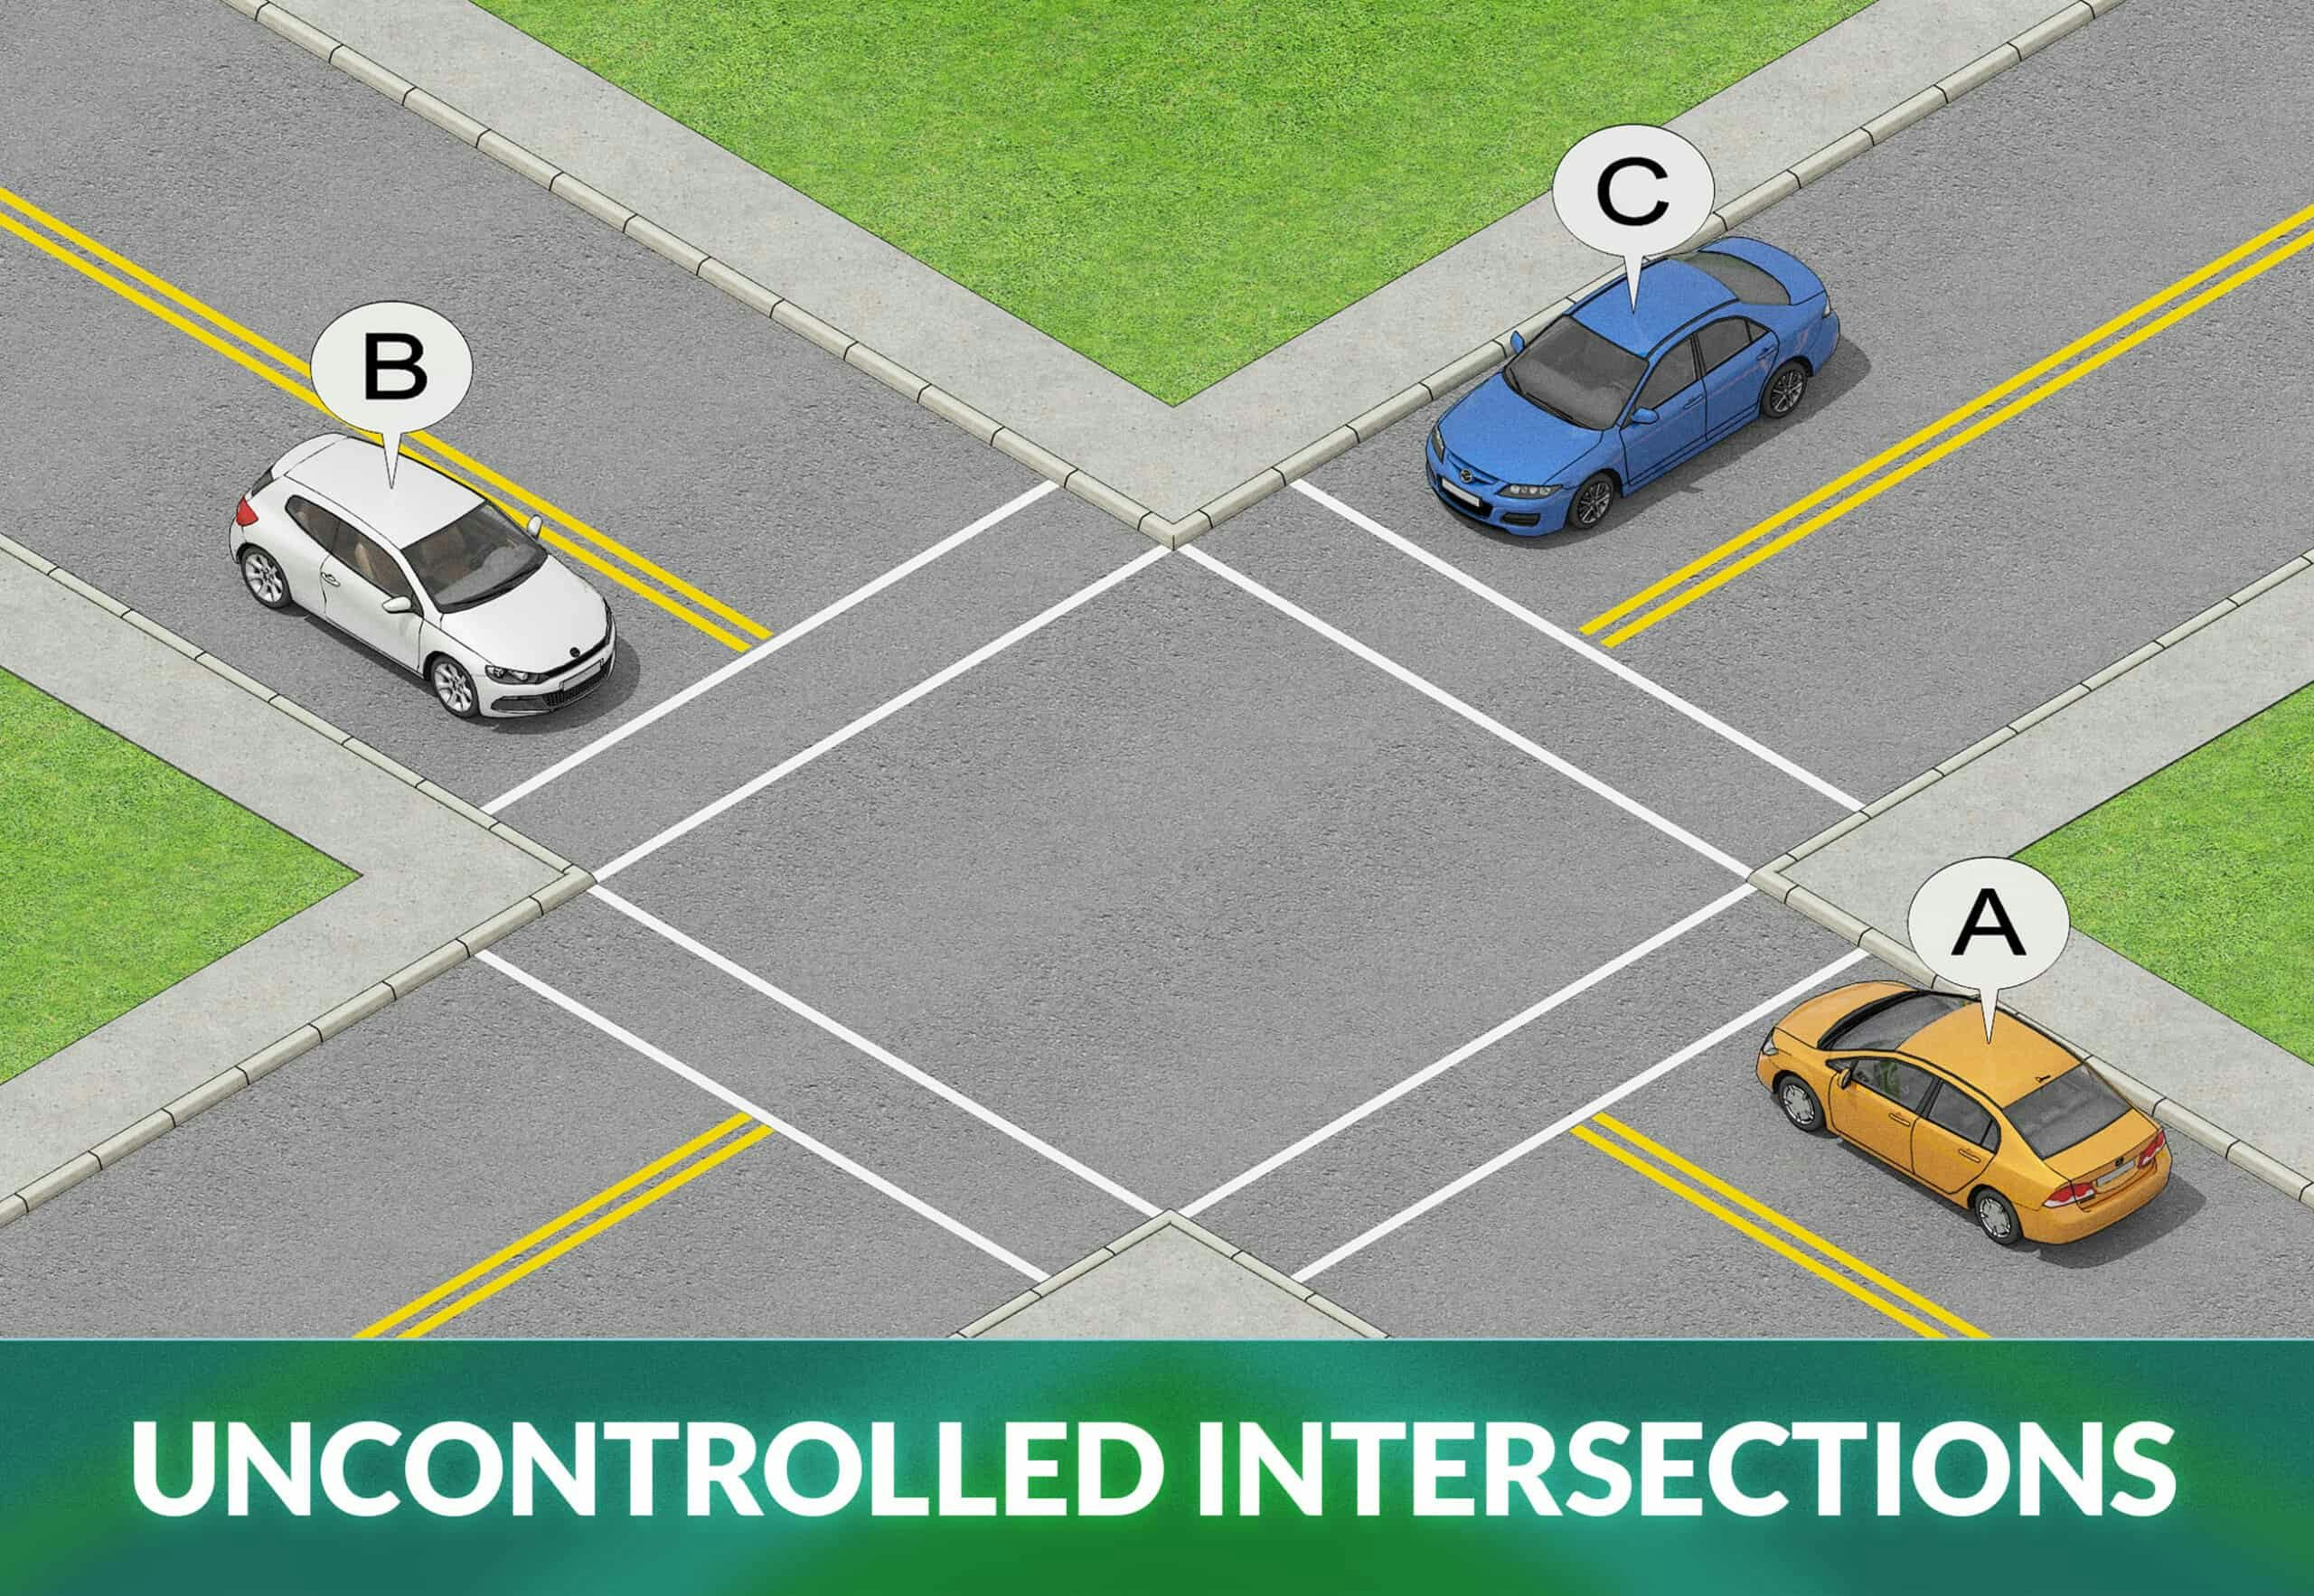 UNCONTROLLED INTERSECTIONS